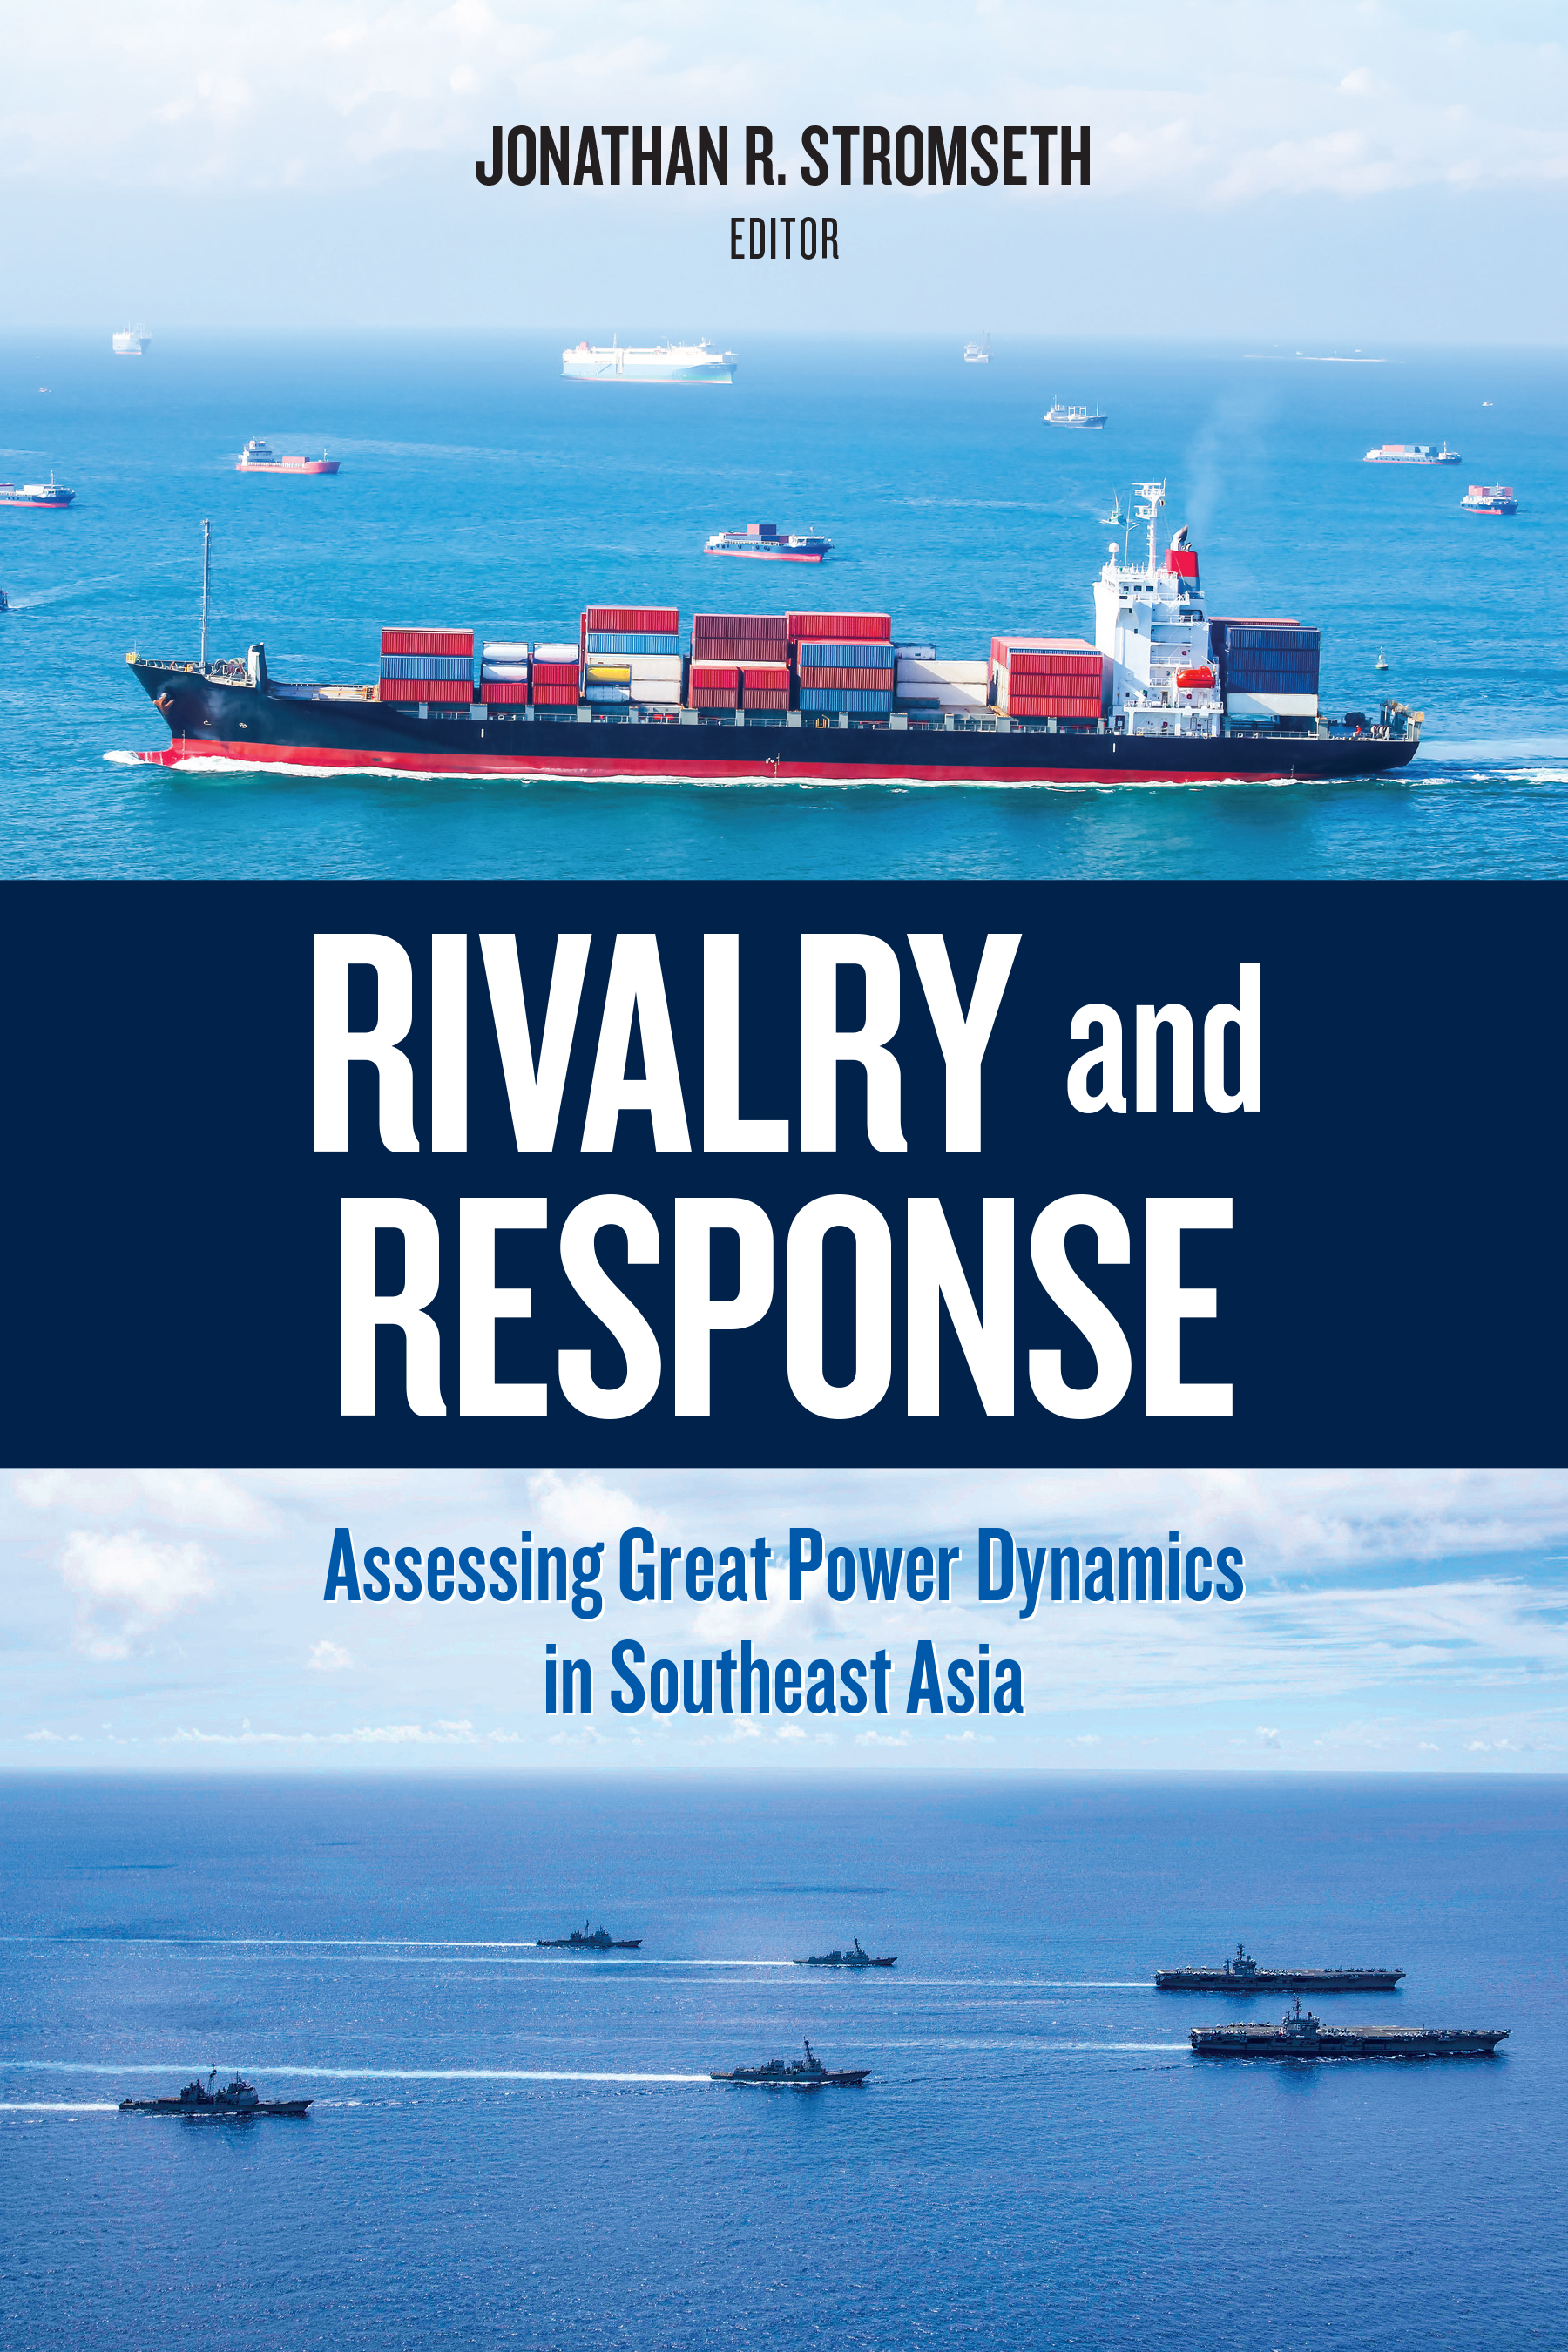 Rivalry and Response